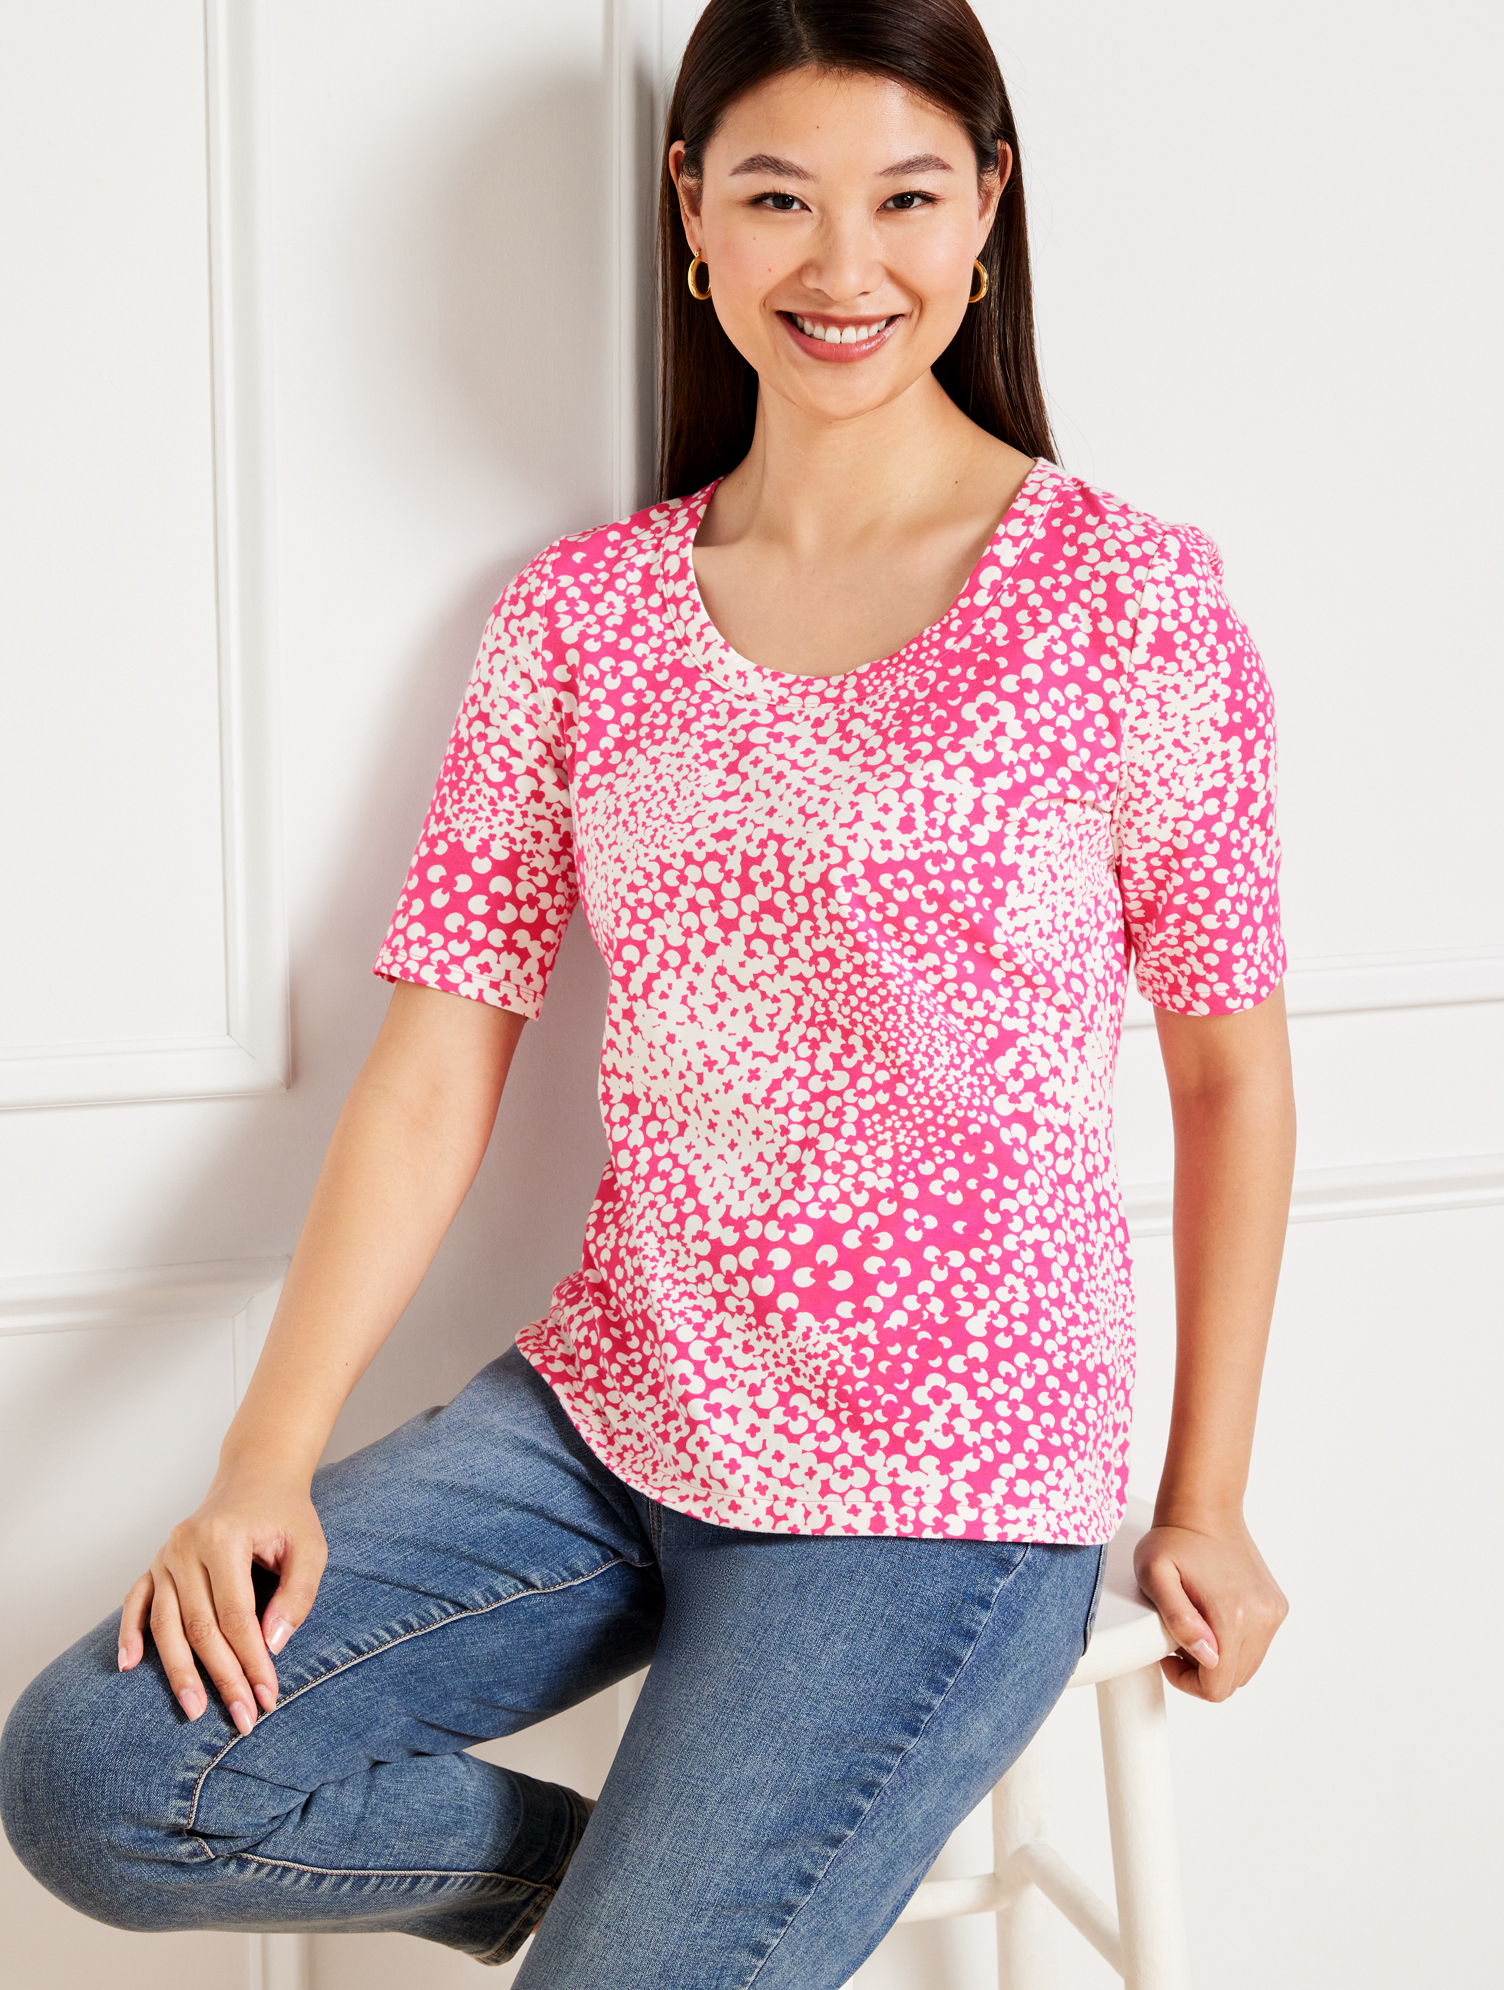 Talbots Petite - Scoop Neck T-shirt - Abstract Clovers - Pink Geranium/ivory - Small  In Pink Geranium,ivory